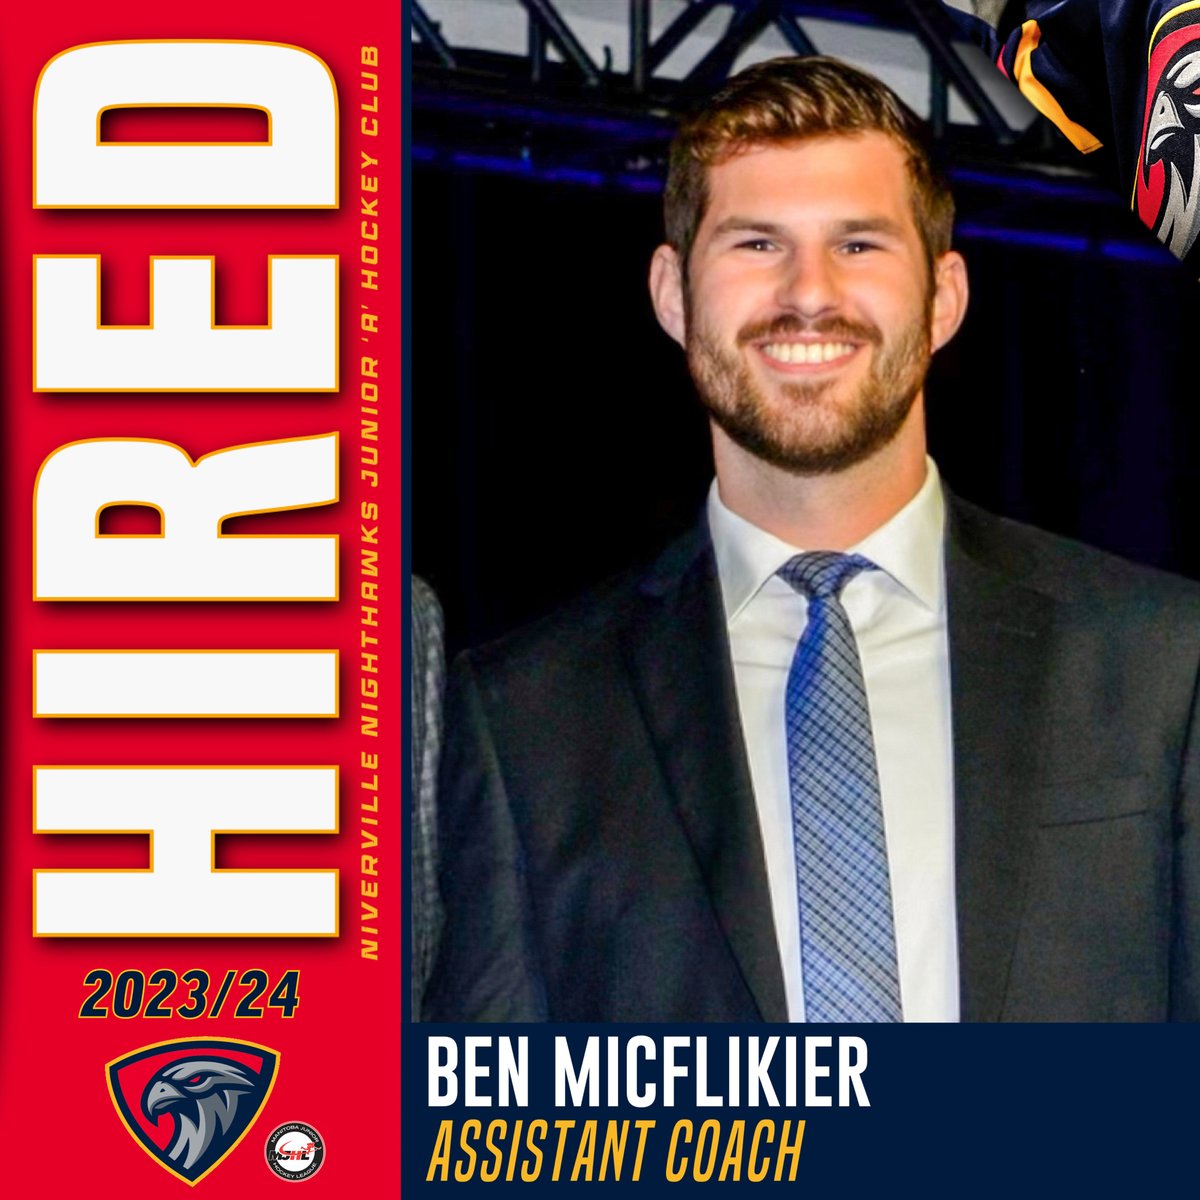 The Nighthawks are pleased to announce the hiring of Ben MicFlikier as an Asst Coach for the 2023/24 season. Ben played in #theMJ two seasons and most recently spent time as a coach for the St. Paul's Crusaders & the St. Boniface Riels.  Welcome to the flock Ben! #takeflightMJ